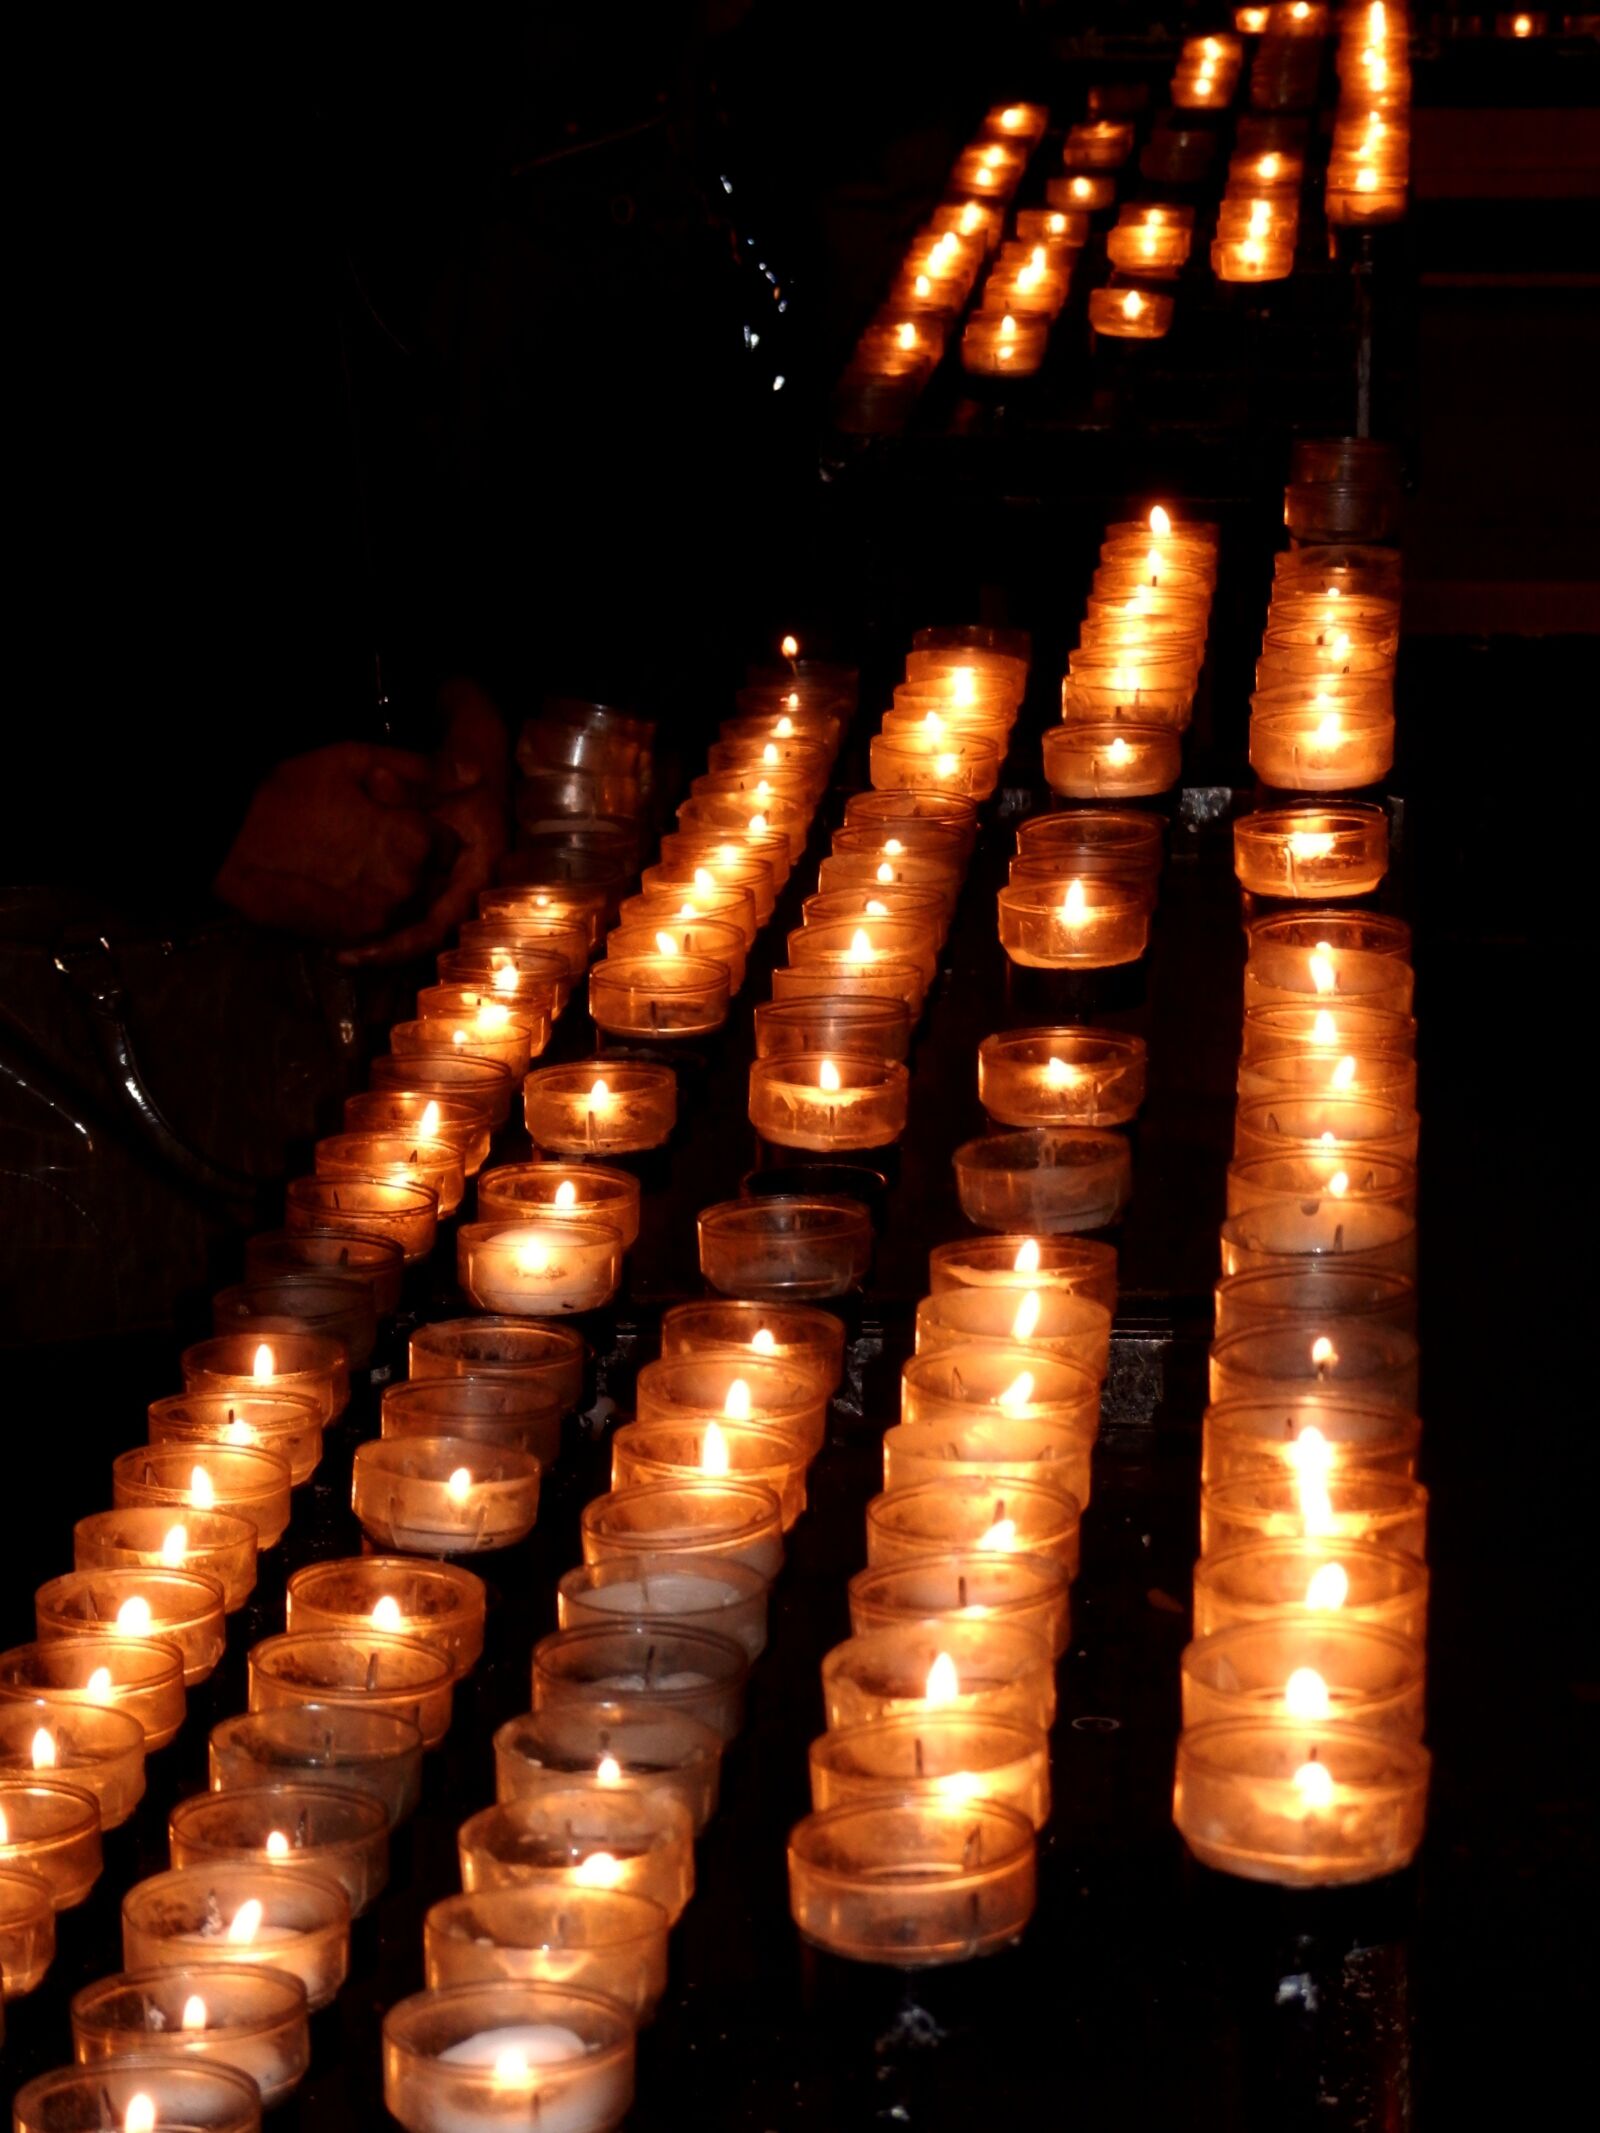 Olympus SZ-31MR sample photo. Cologne cathedral, candles, church photography